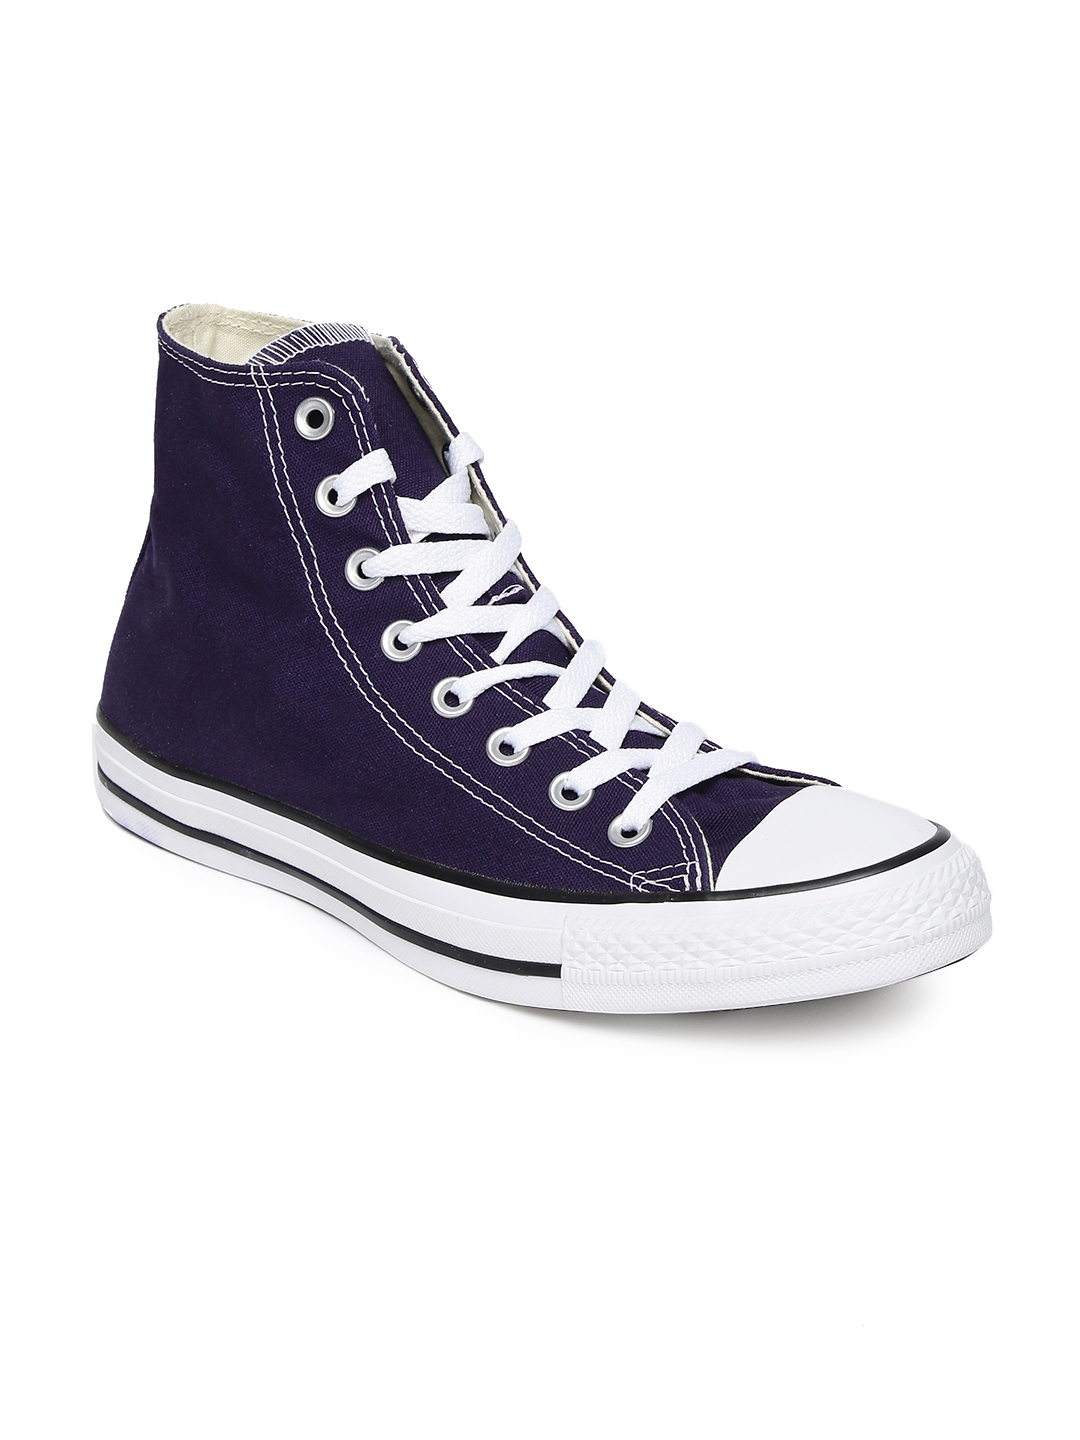 Buy Converse Unisex Navy Blue Solid Canvas High Top Sneakers - Casual Shoes  for Unisex 2289817 | Myntra